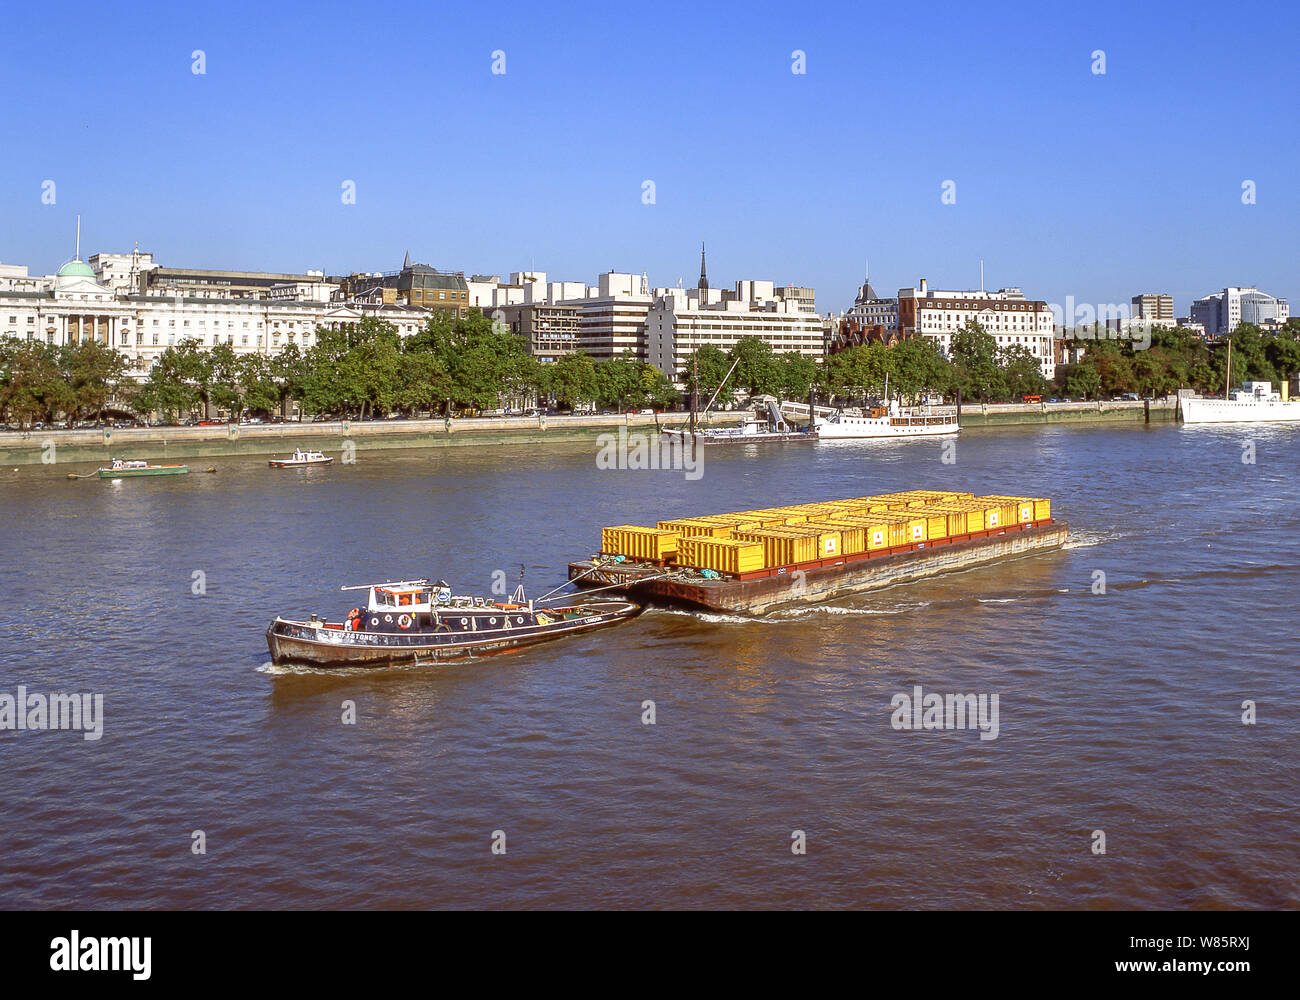 Tugboat towing floating container barge on River Thames, South Bank, London Borough of Lambeth, Greater London, England, United Kingdom Stock Photo